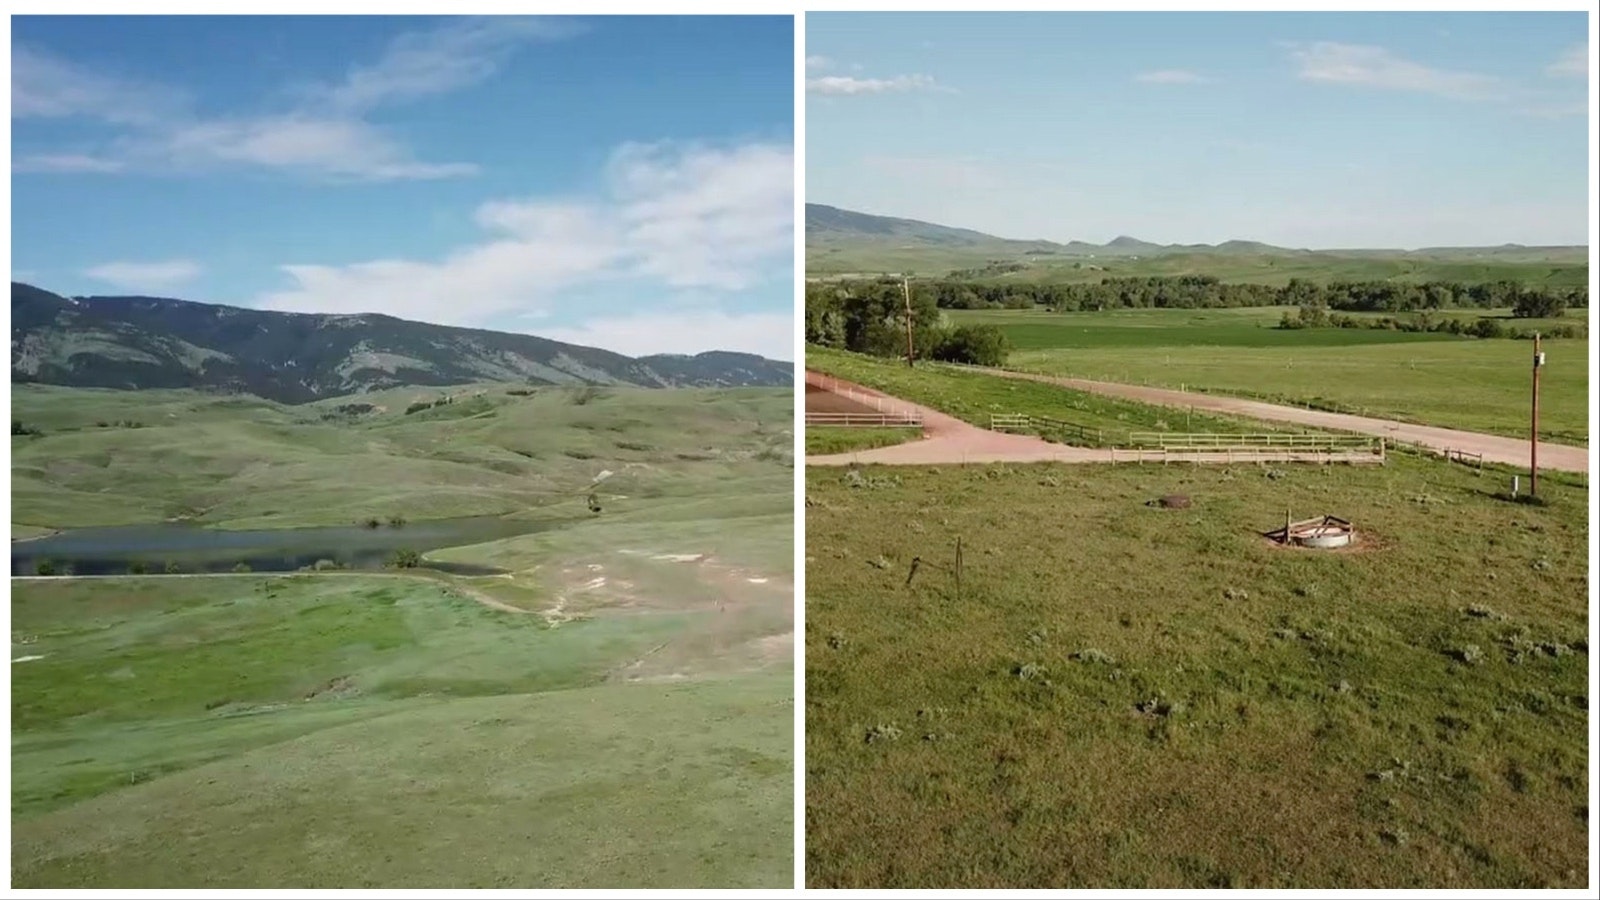 A controversial land swap in Sheridan County calls for about 630 acres of private land, right, to be traded for 560 acres of state land near the base of the Bighorn Mountain, left.